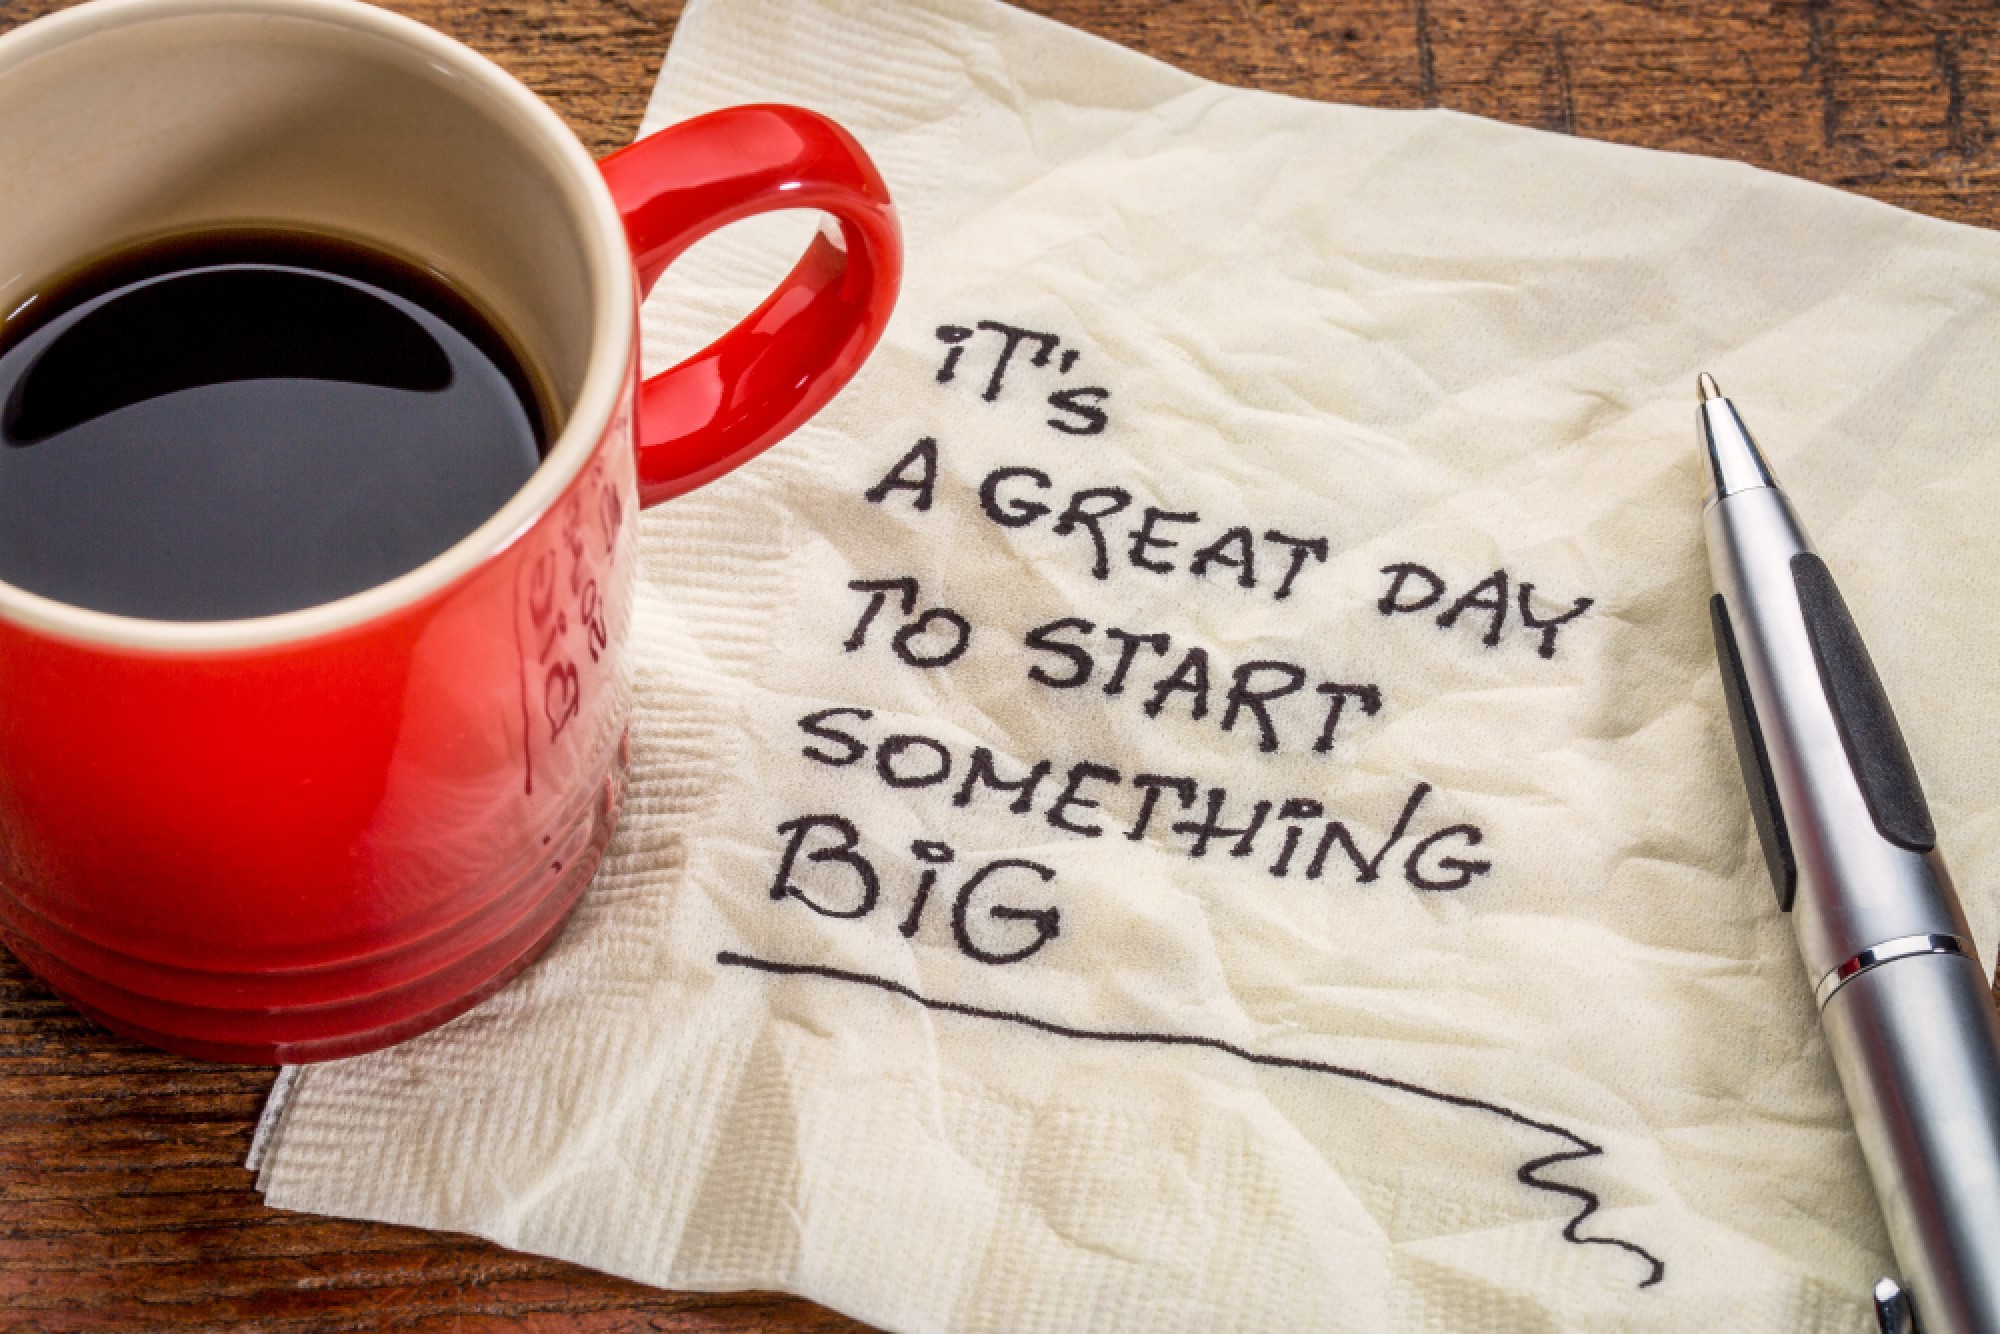 Napkin with "It's a great day to start something BIG" written on it